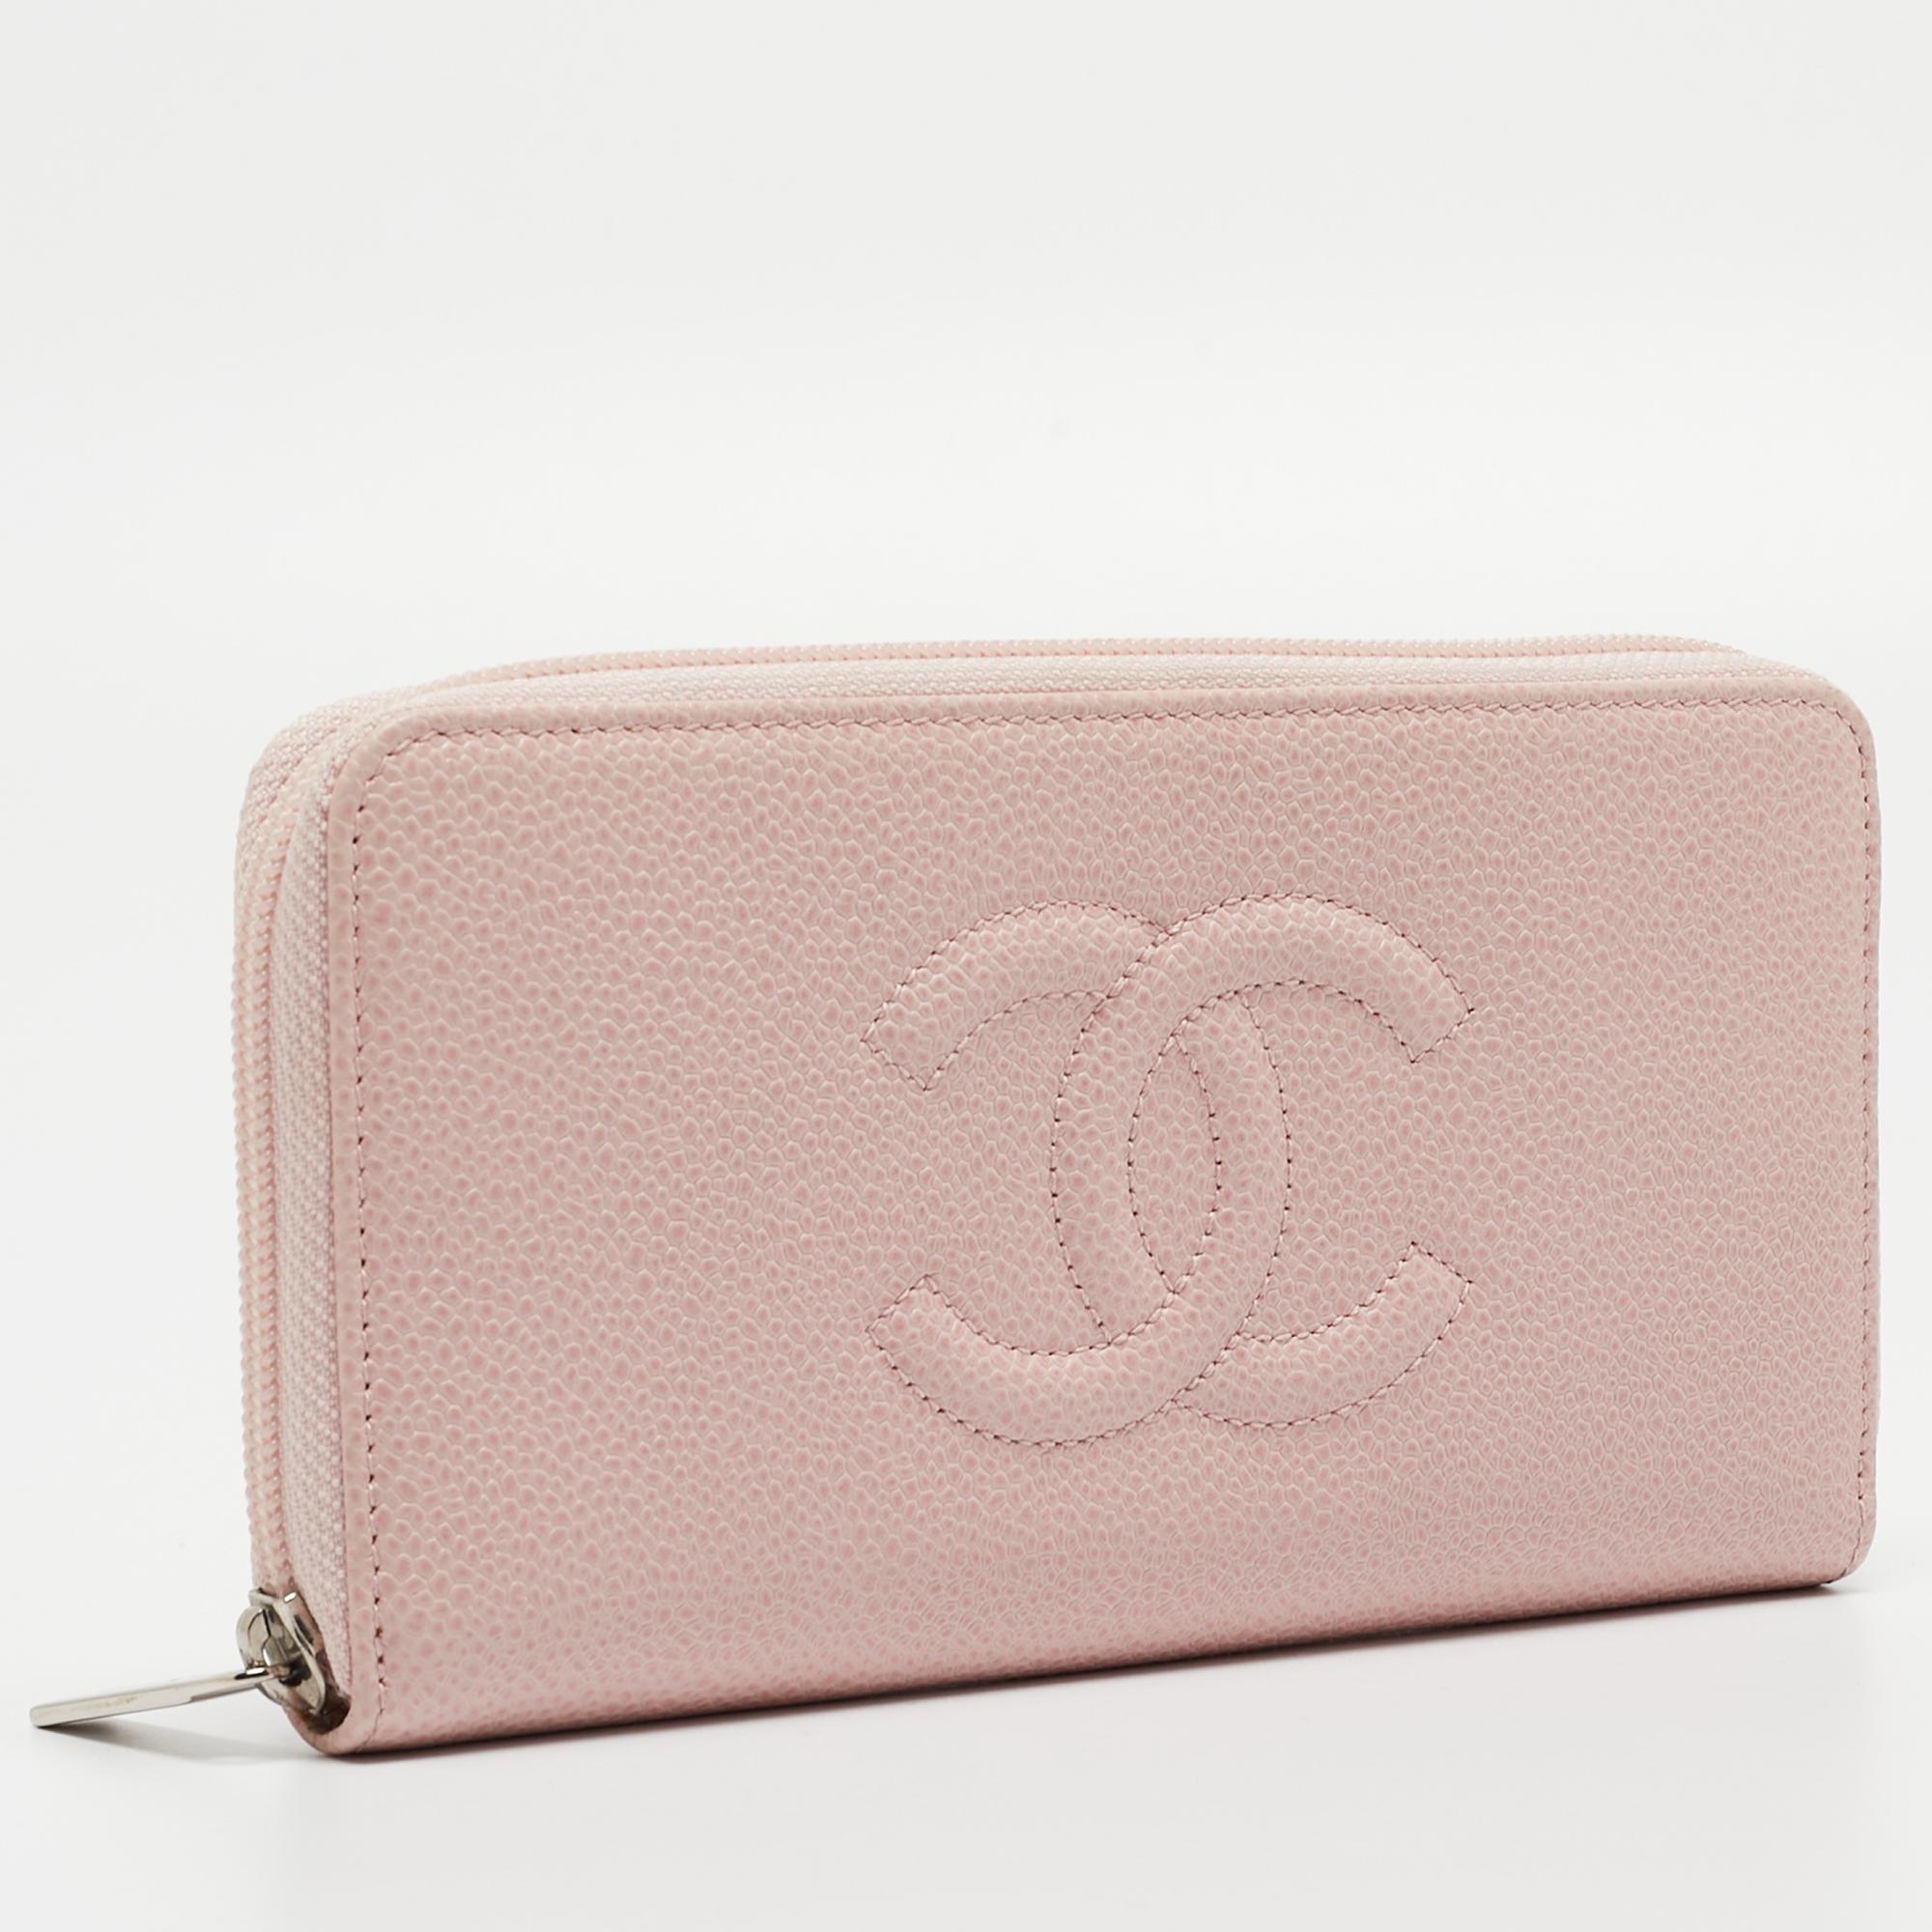 Chanel Pink Caviar Leather CC Zip Around Wallet For Sale 4